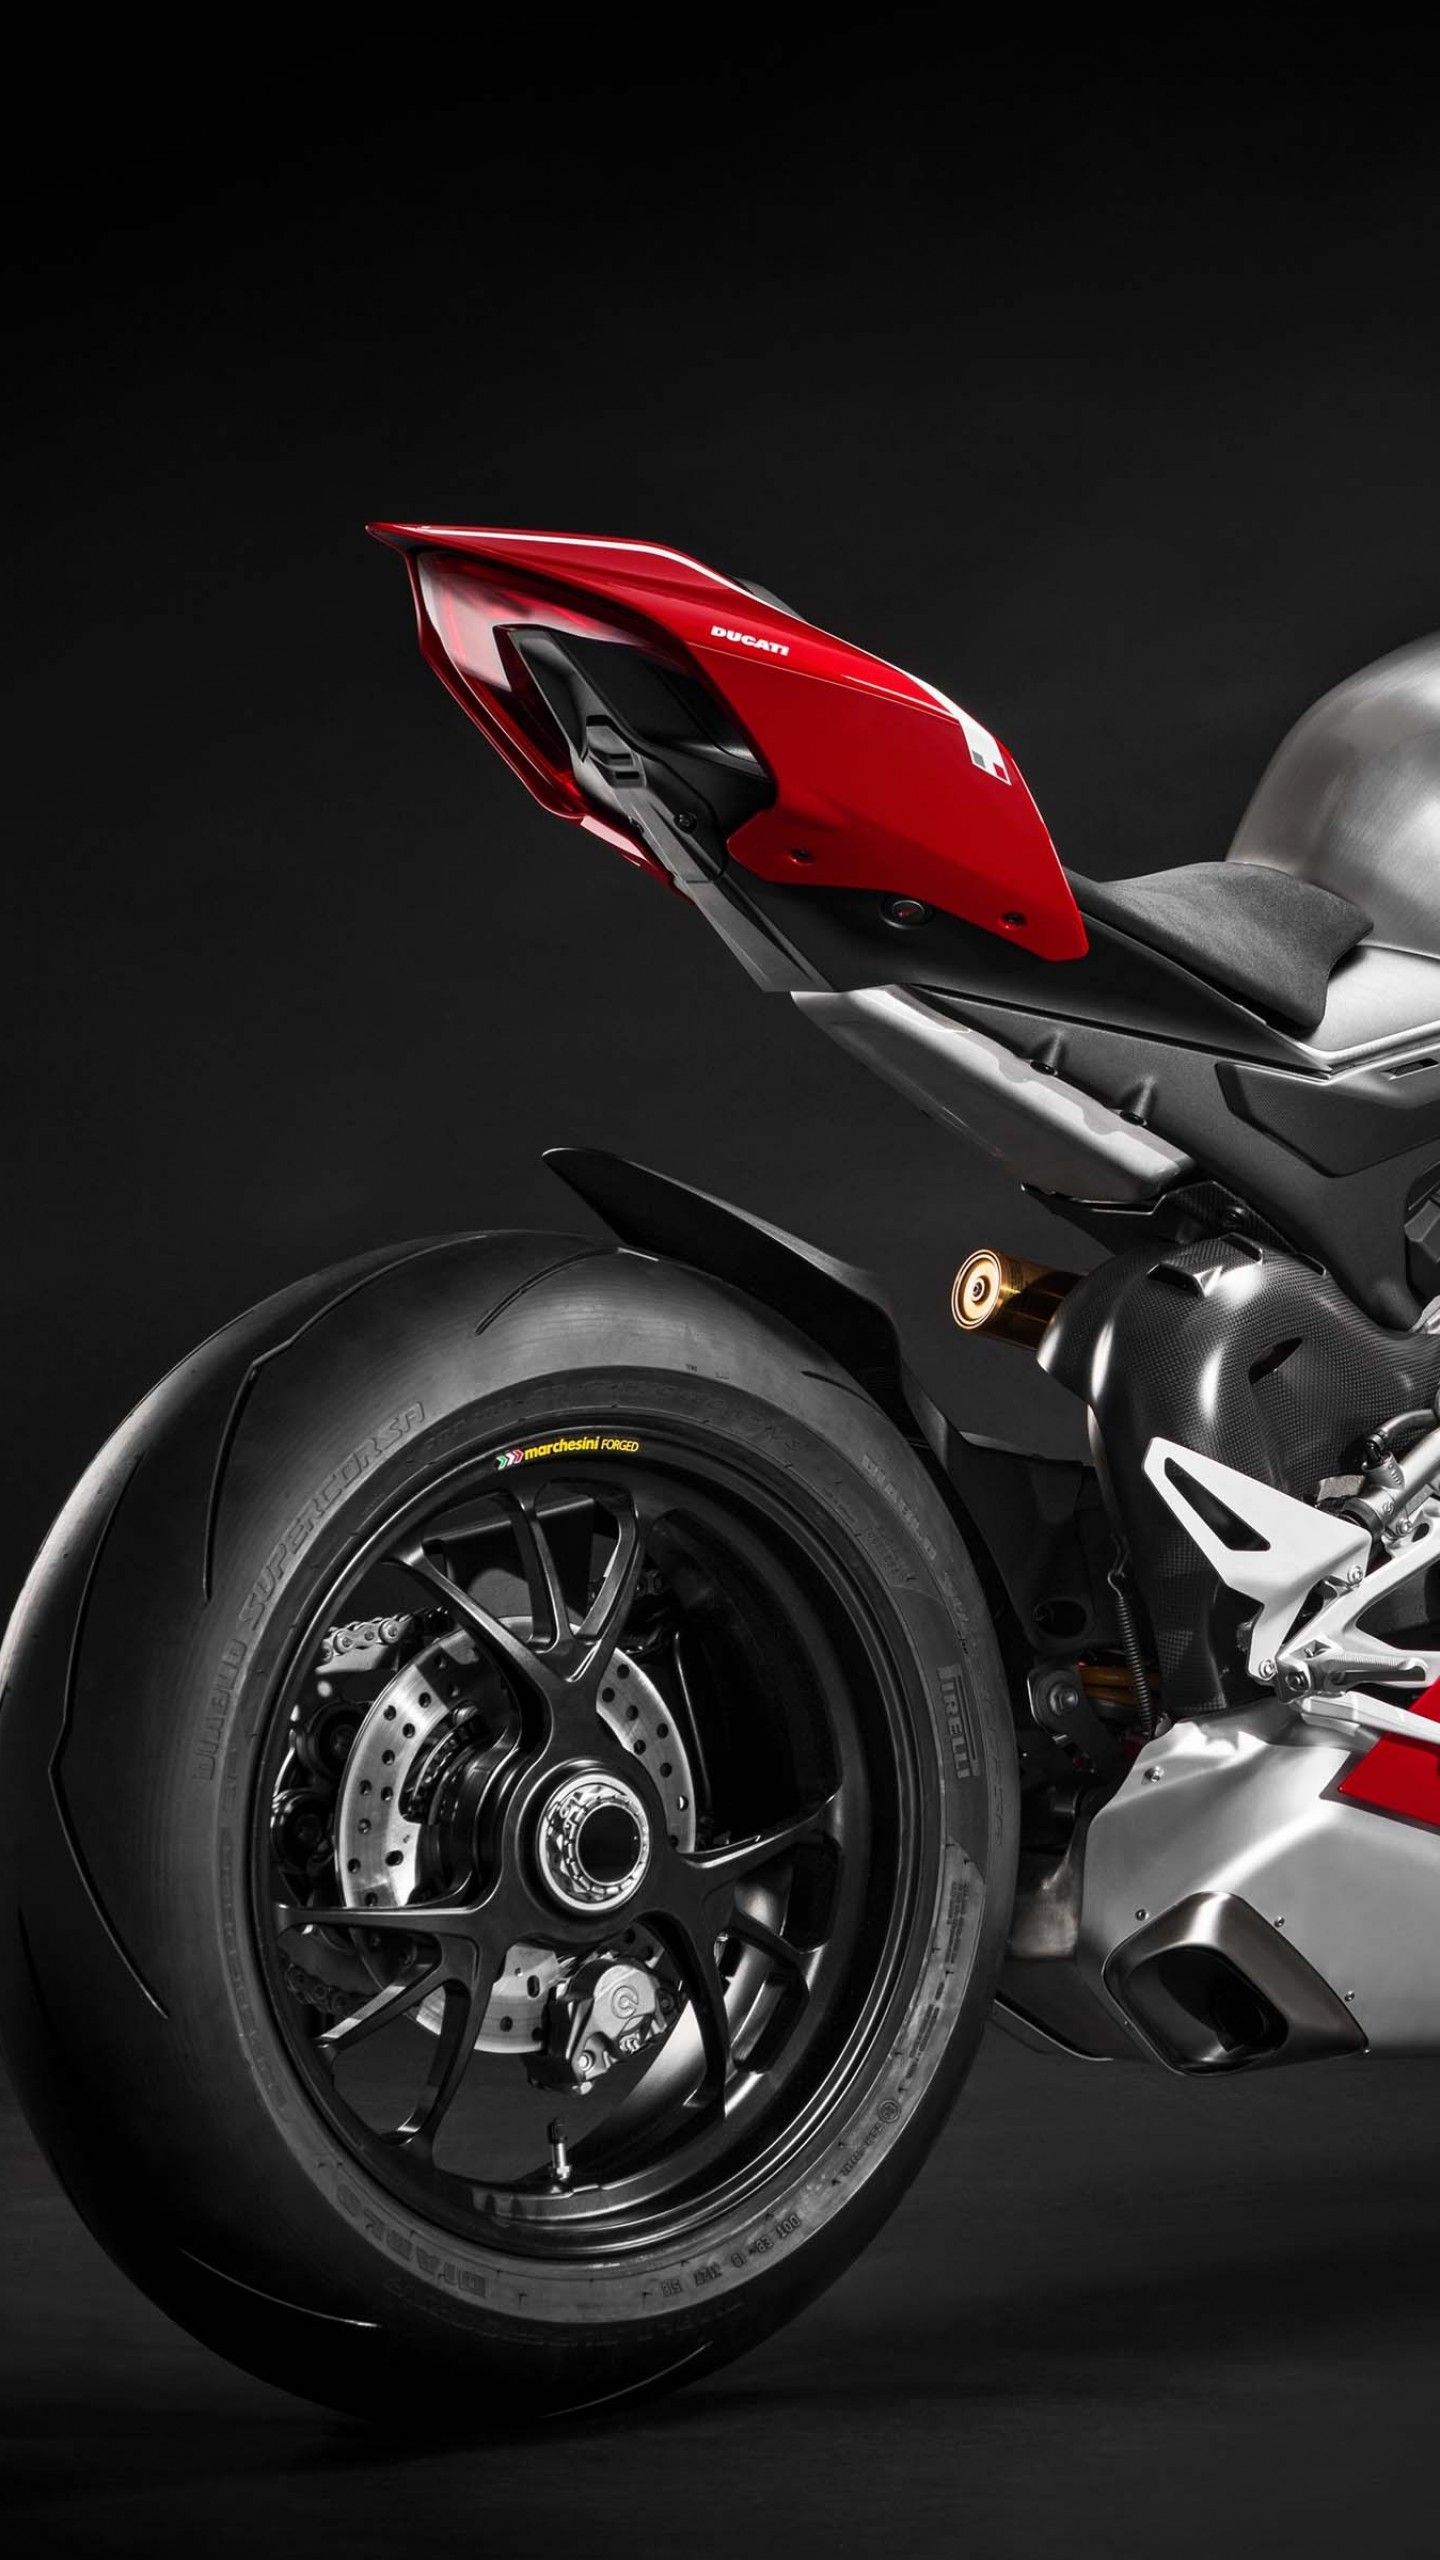 Wallpaper Ducati Panigale V4 R, 4K, Automotive,. Wallpaper for iPhone, Android, Mobile and Desktop